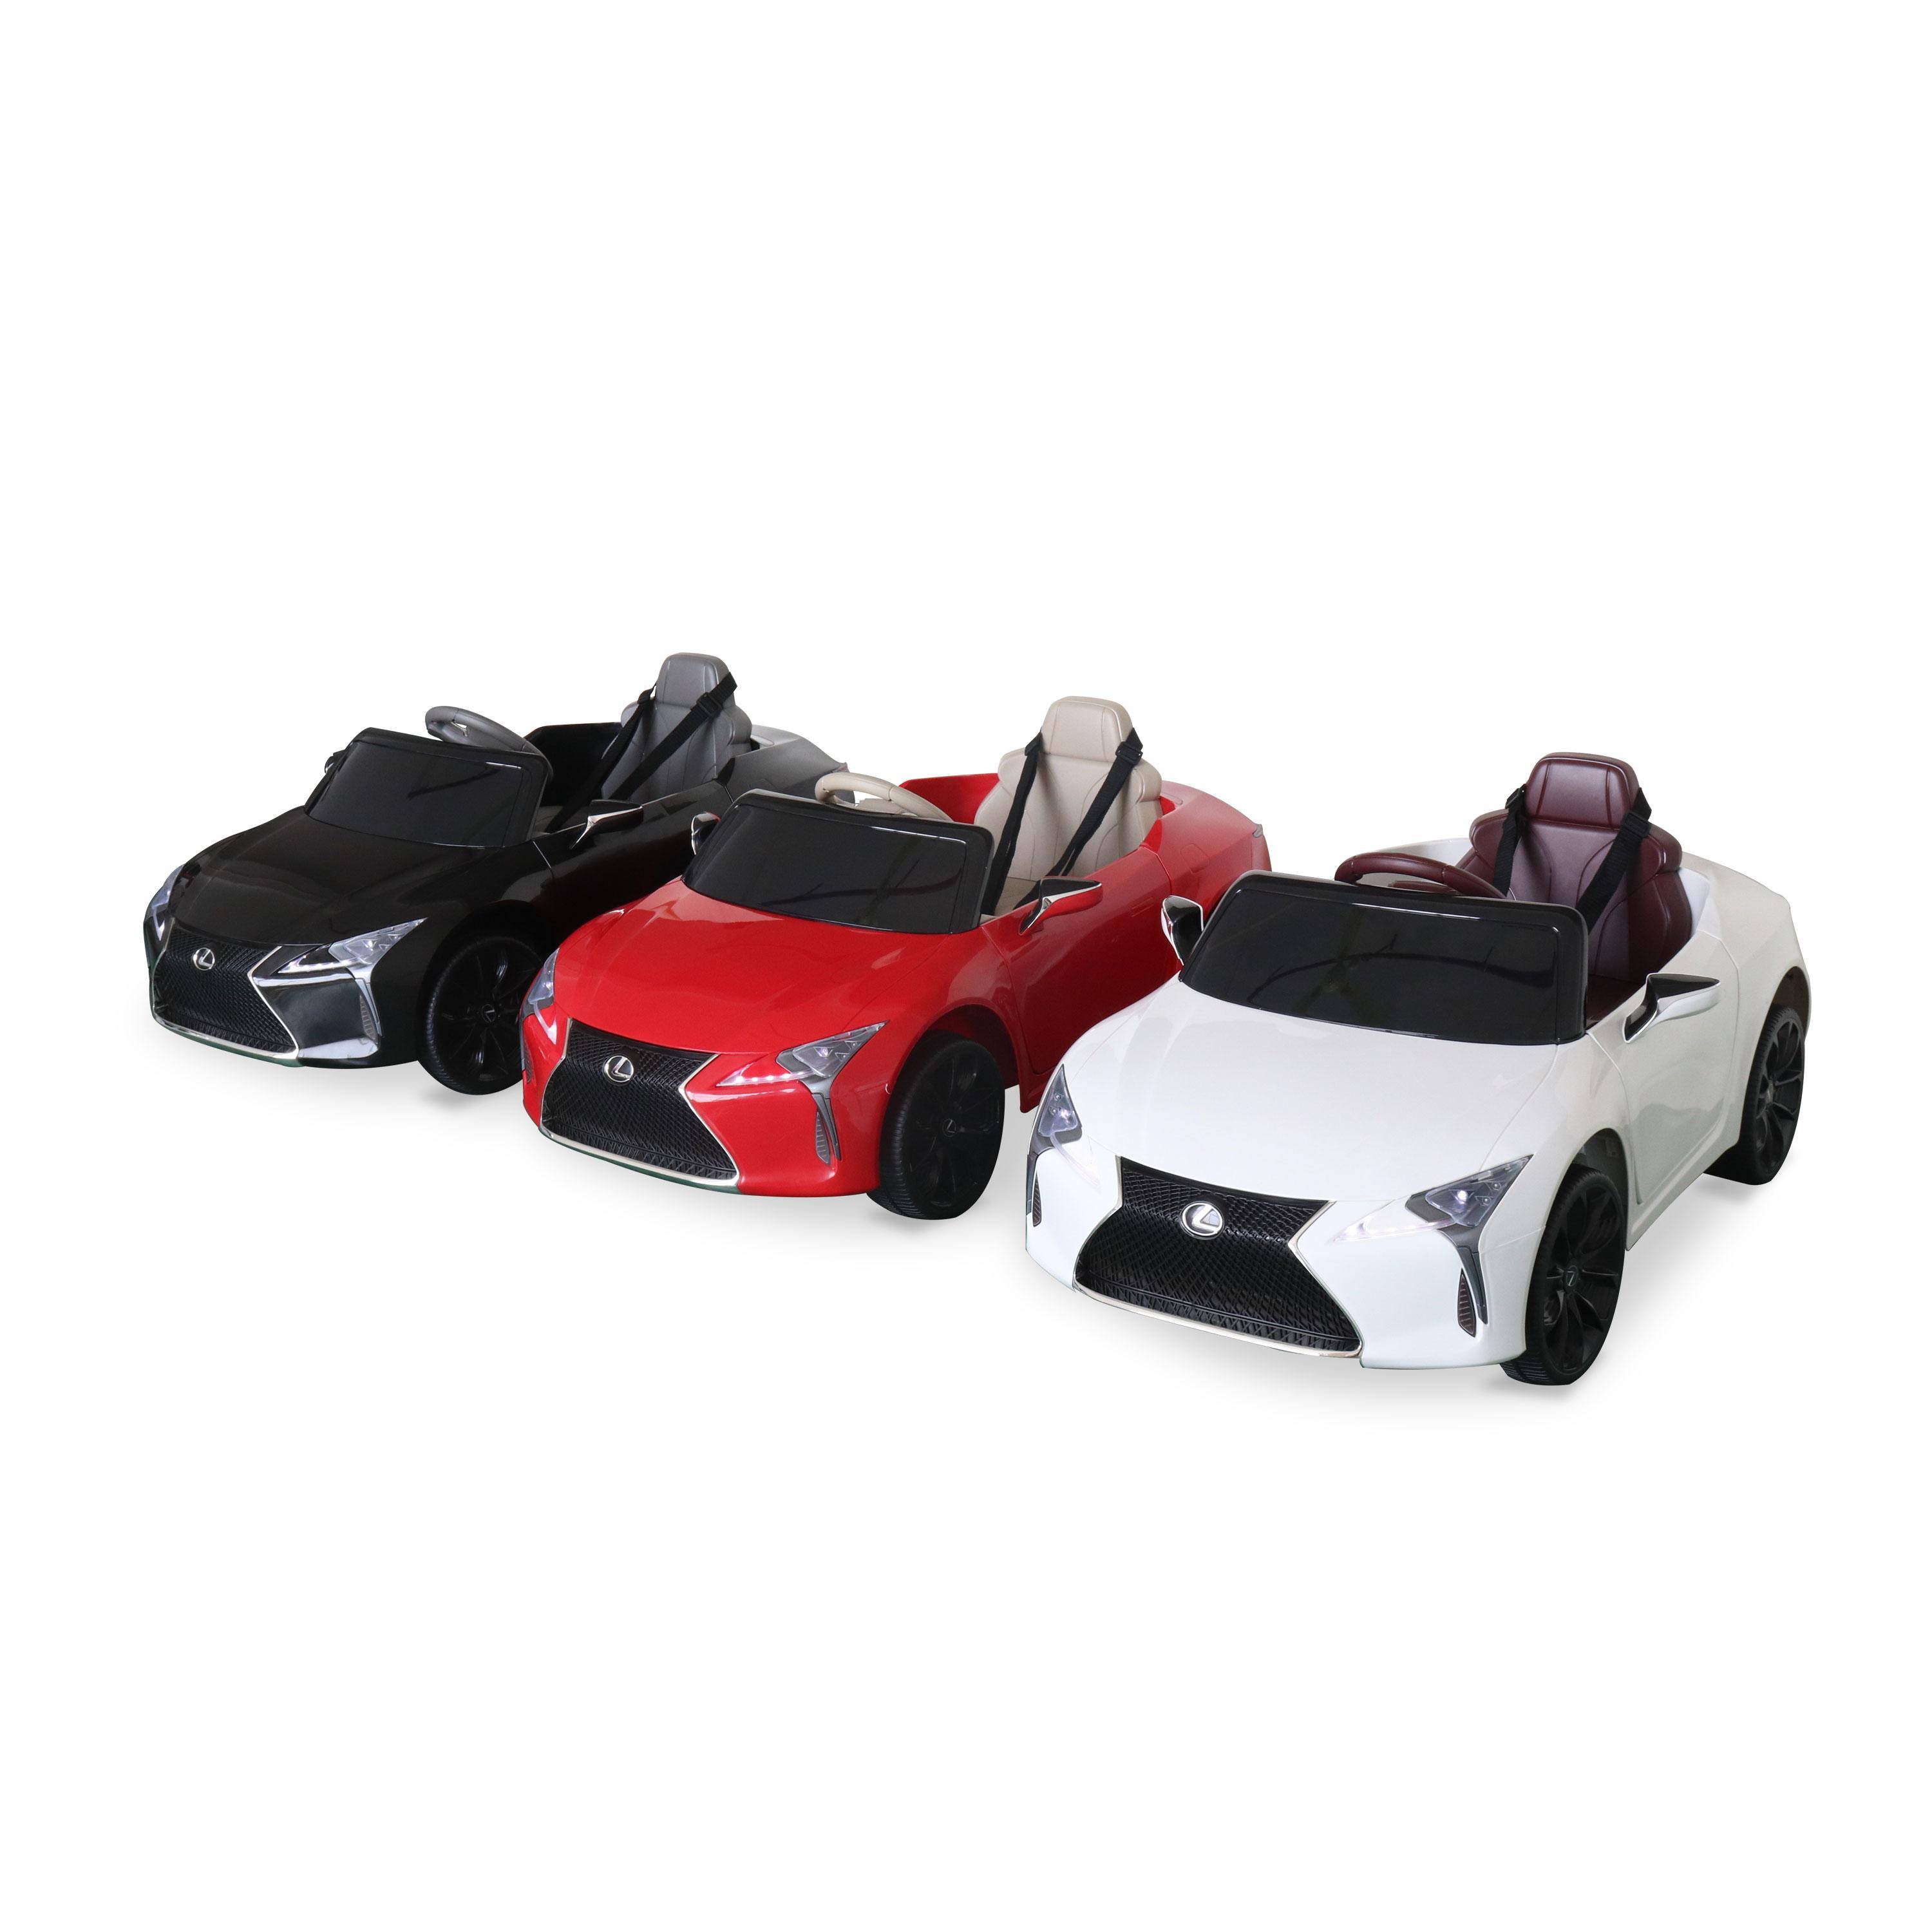 Children's electric car 12V, 1 seat, 4x4 with car radio and remote control - Lexus LC500 - Red,sweeek,Photo8